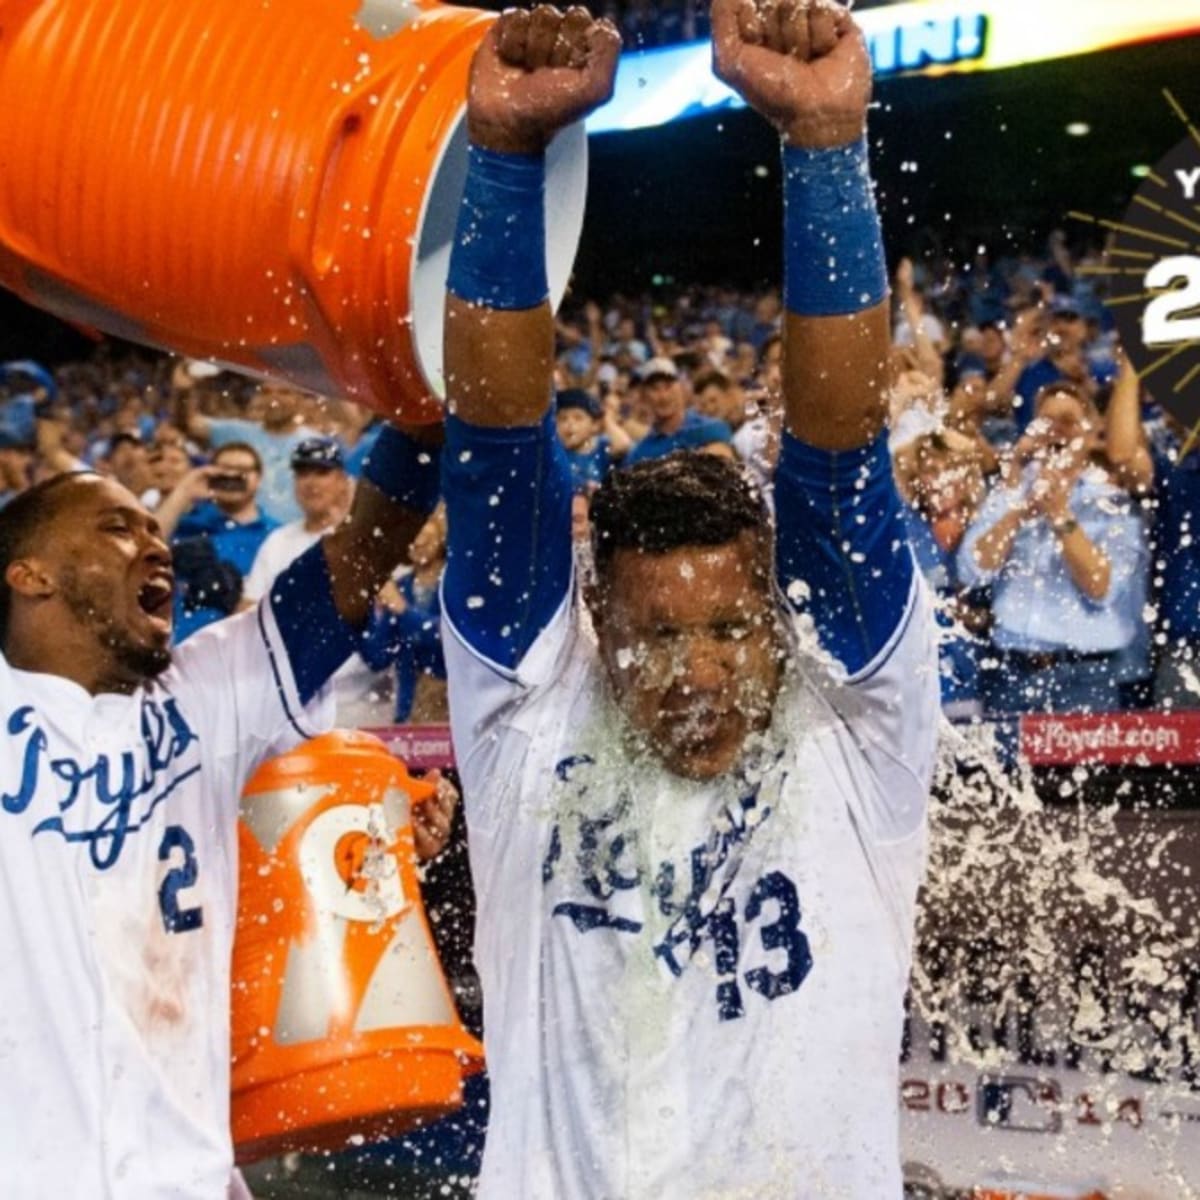 Royals Review on X: Royals and Mariners are celebrating the 20th